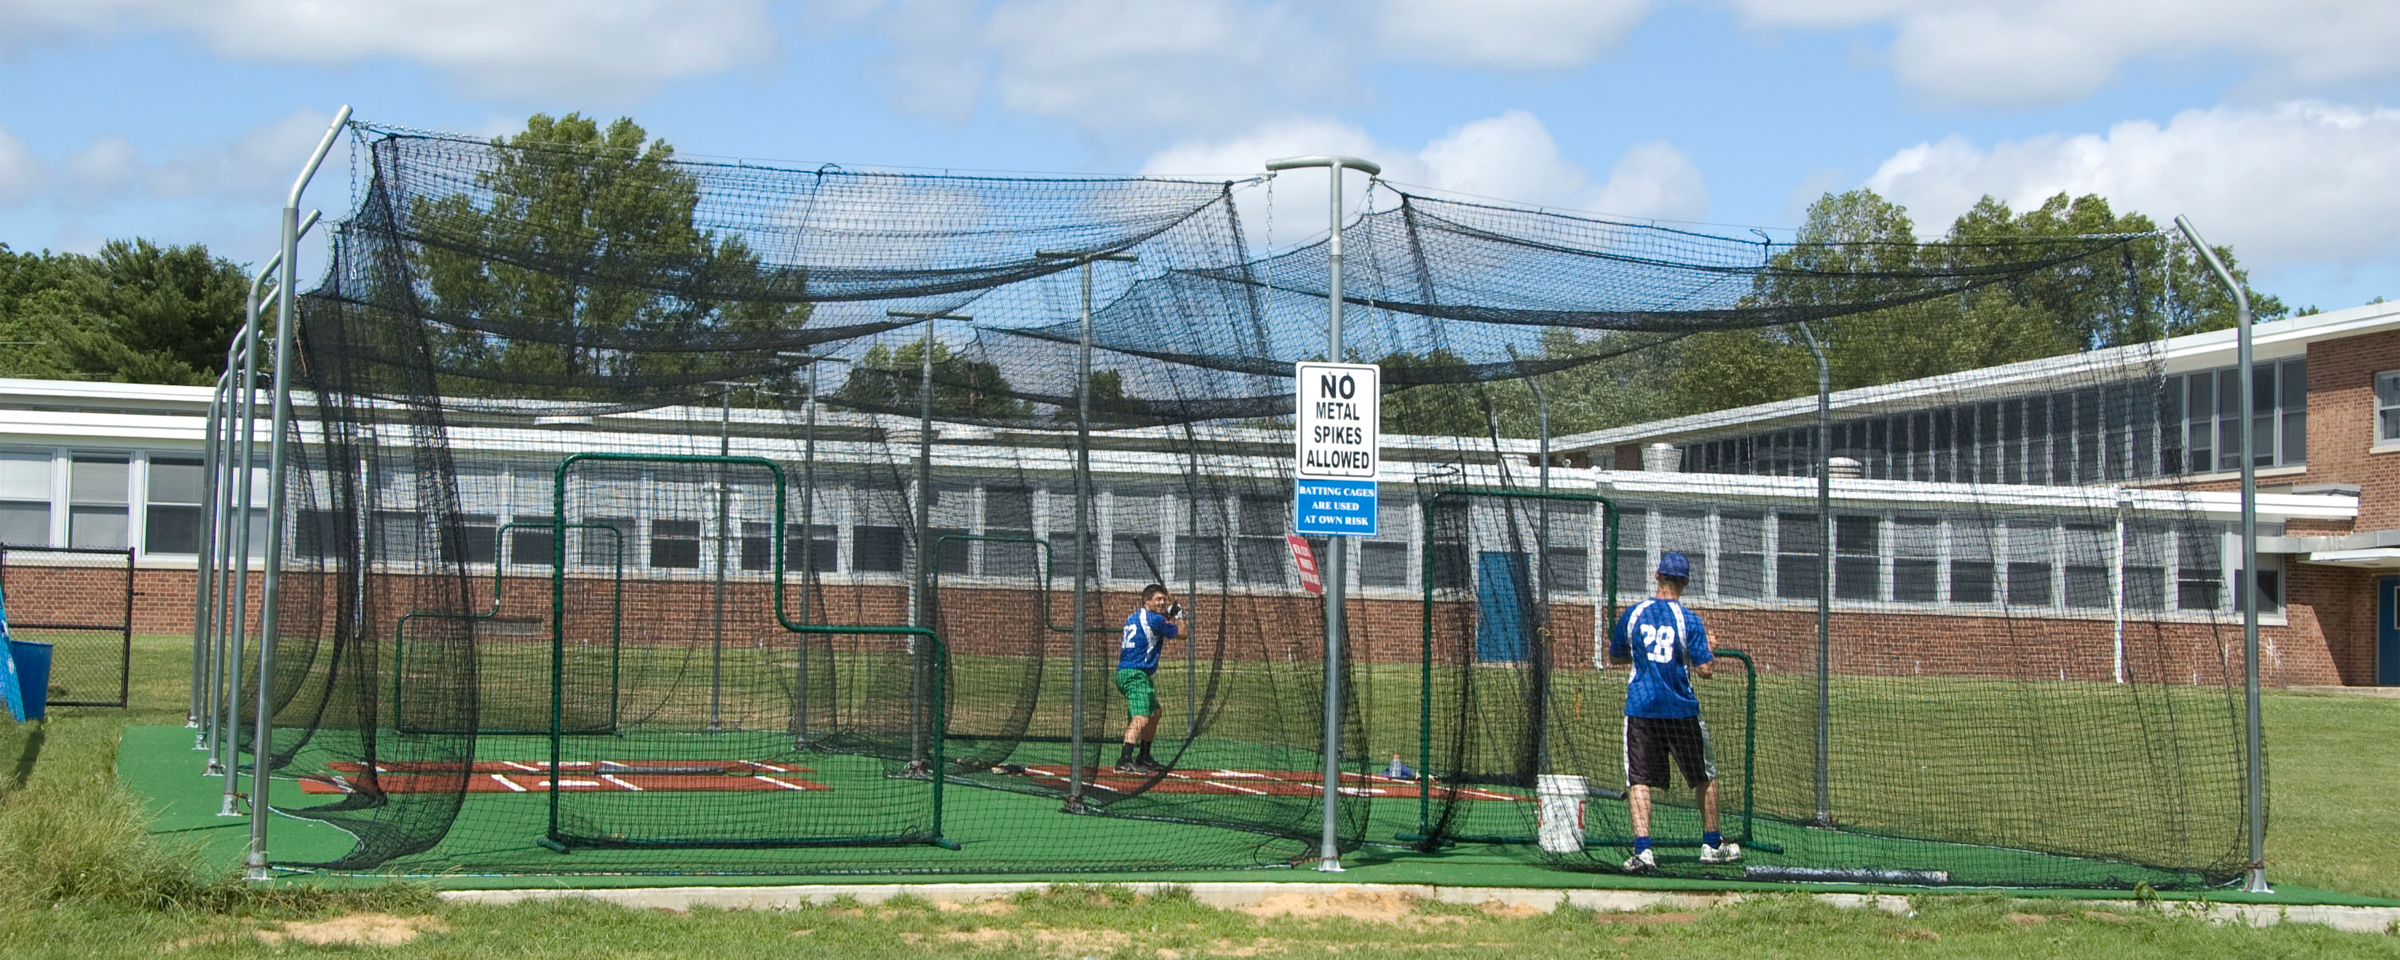 More information about the doube commercial batting cage from On Deck Sports